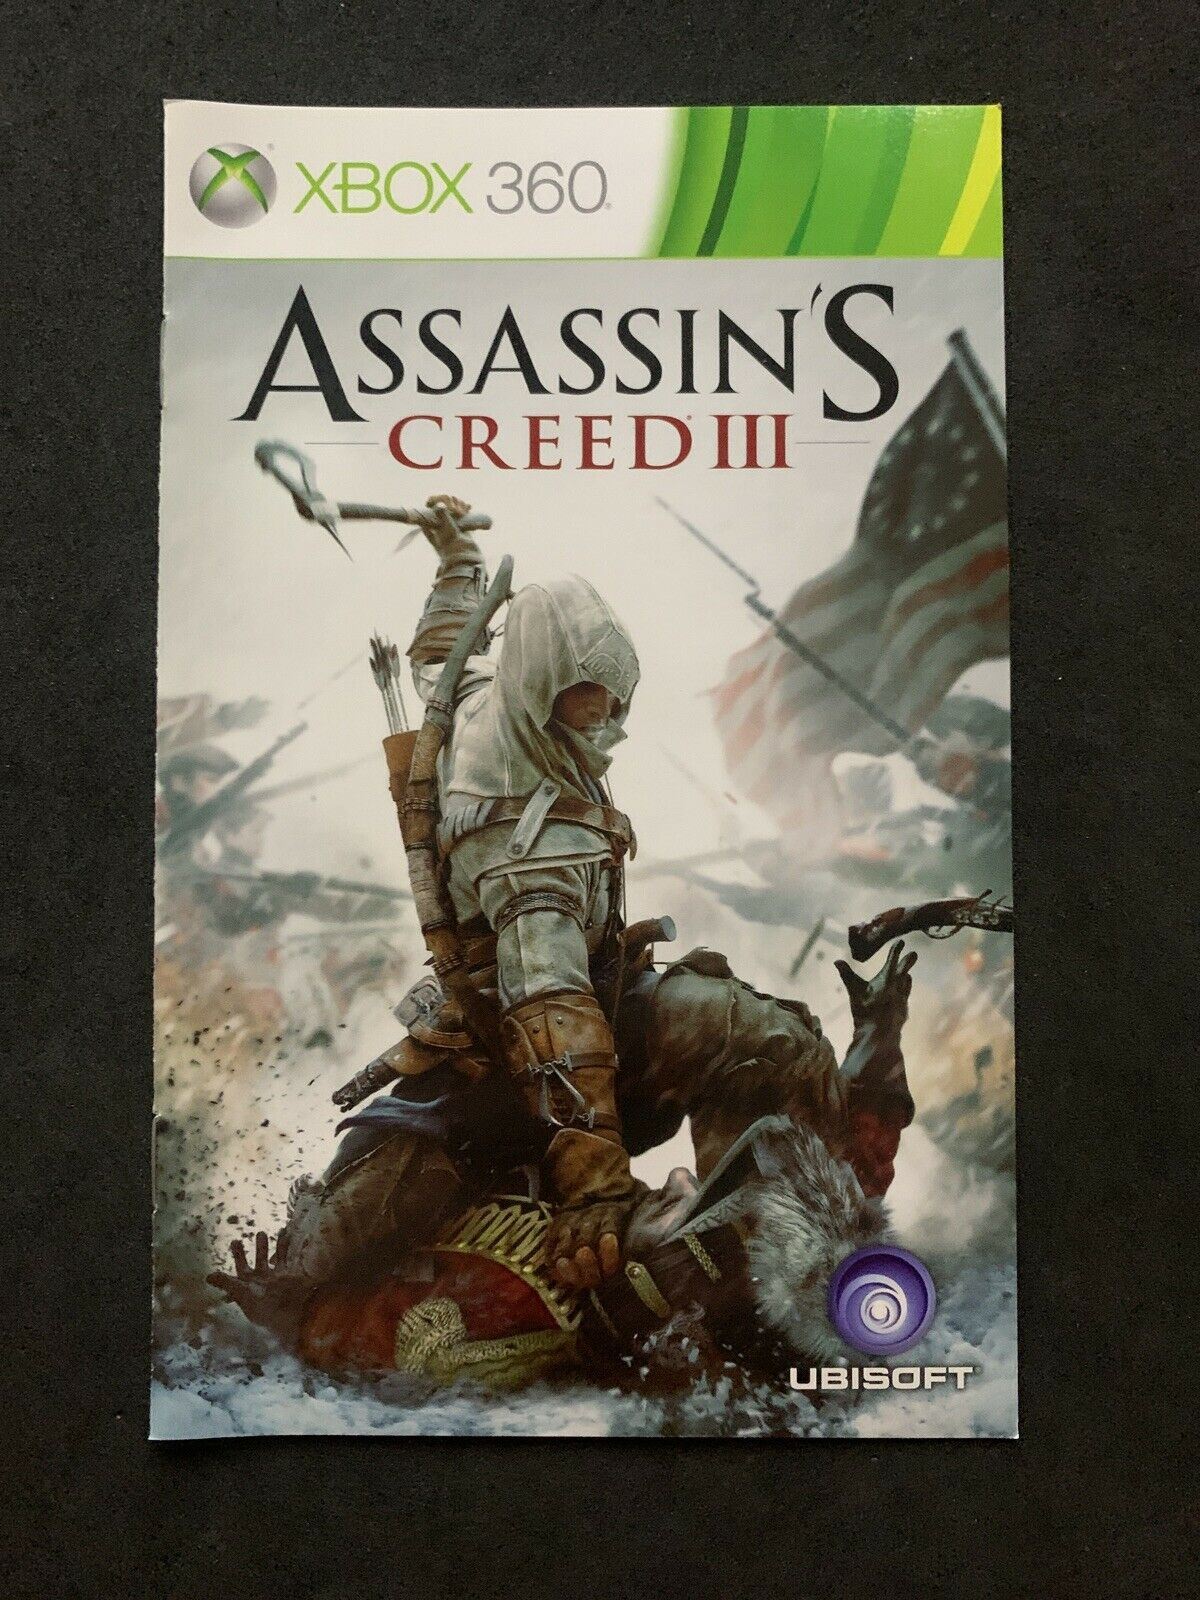 Assassins Creed III (3) - Xbox 360 - Complete With Booklet